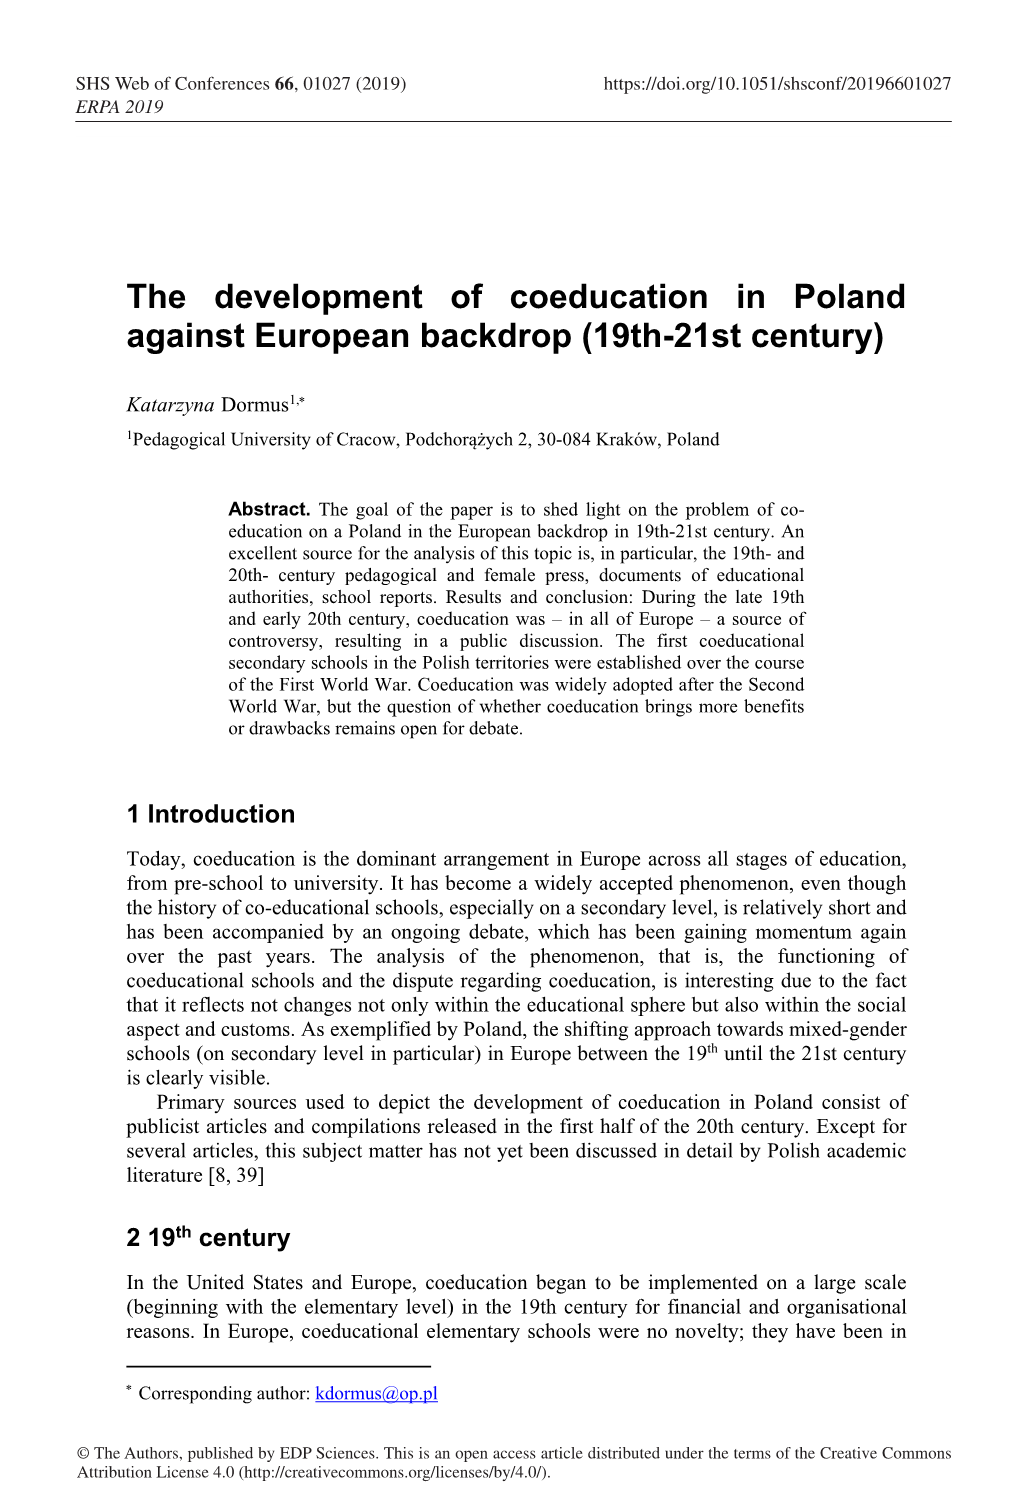 The Development of Coeducation in Poland Against European Backdrop (19Th-21St Century)